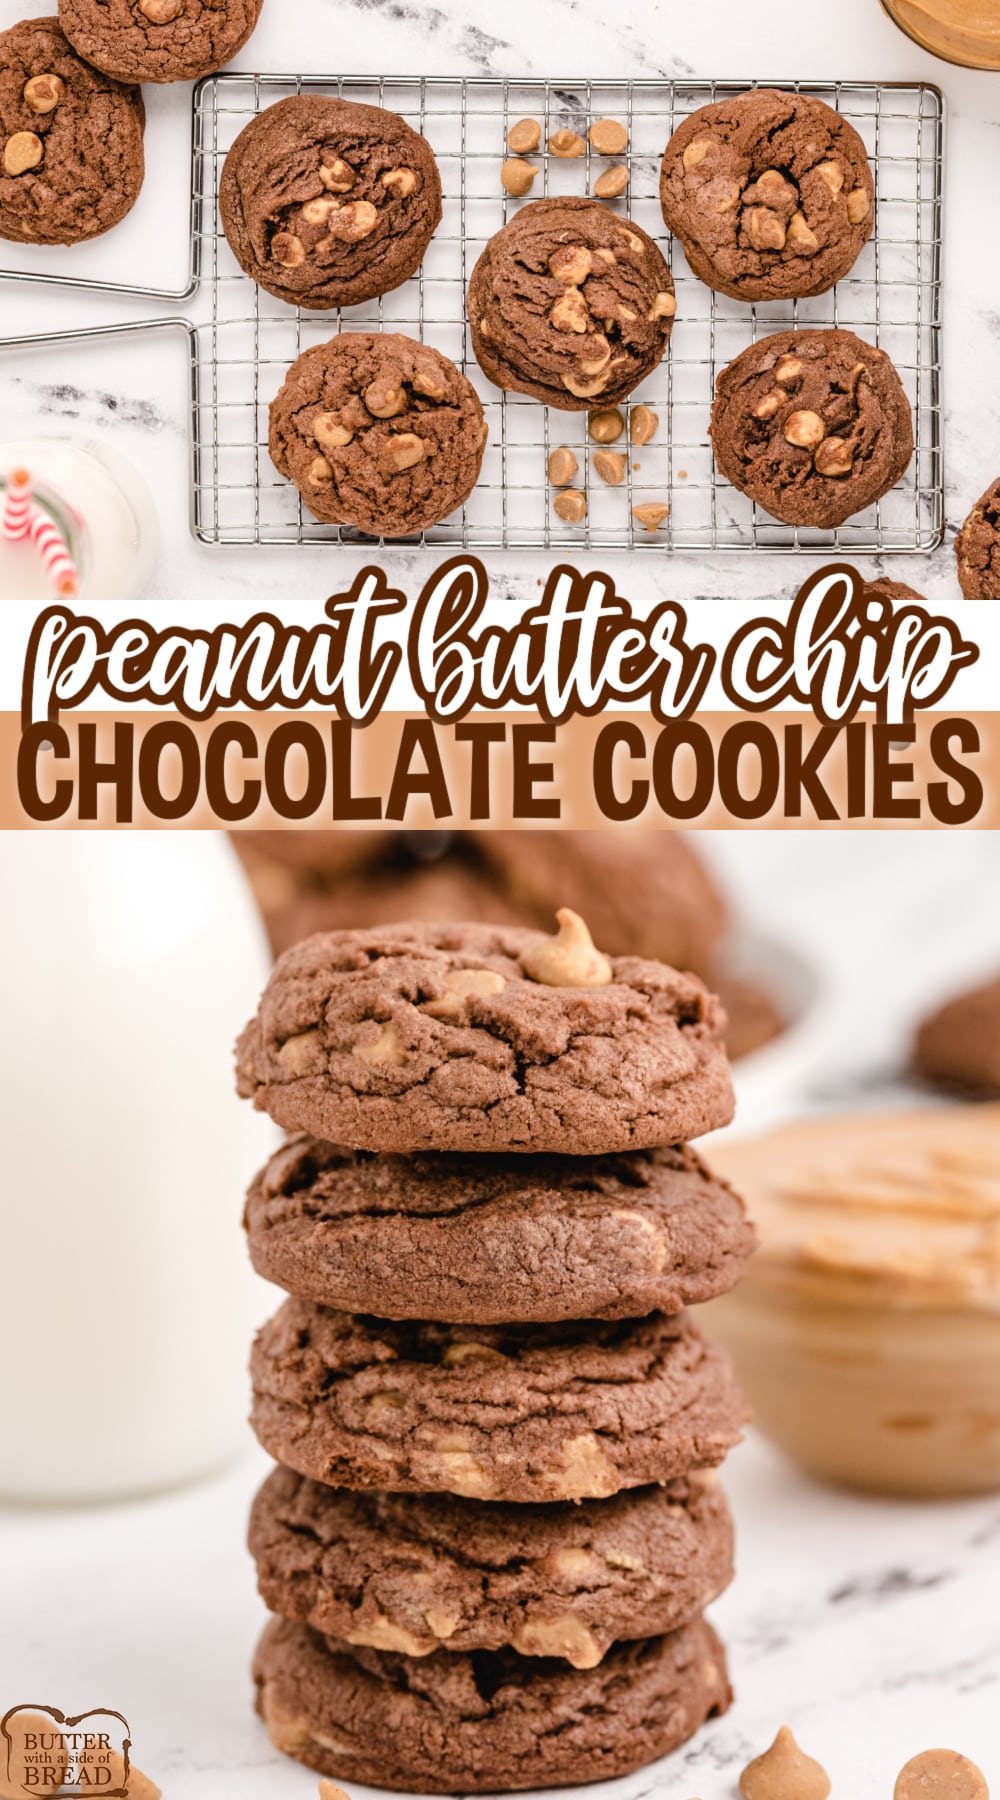 Chocolate Peanut Butter Chip Cookies made with chocolate pudding mix and Reese's peanut butter chips. Deliciously soft and chewy cookies with tons of chocolate and peanut butter flavor! 